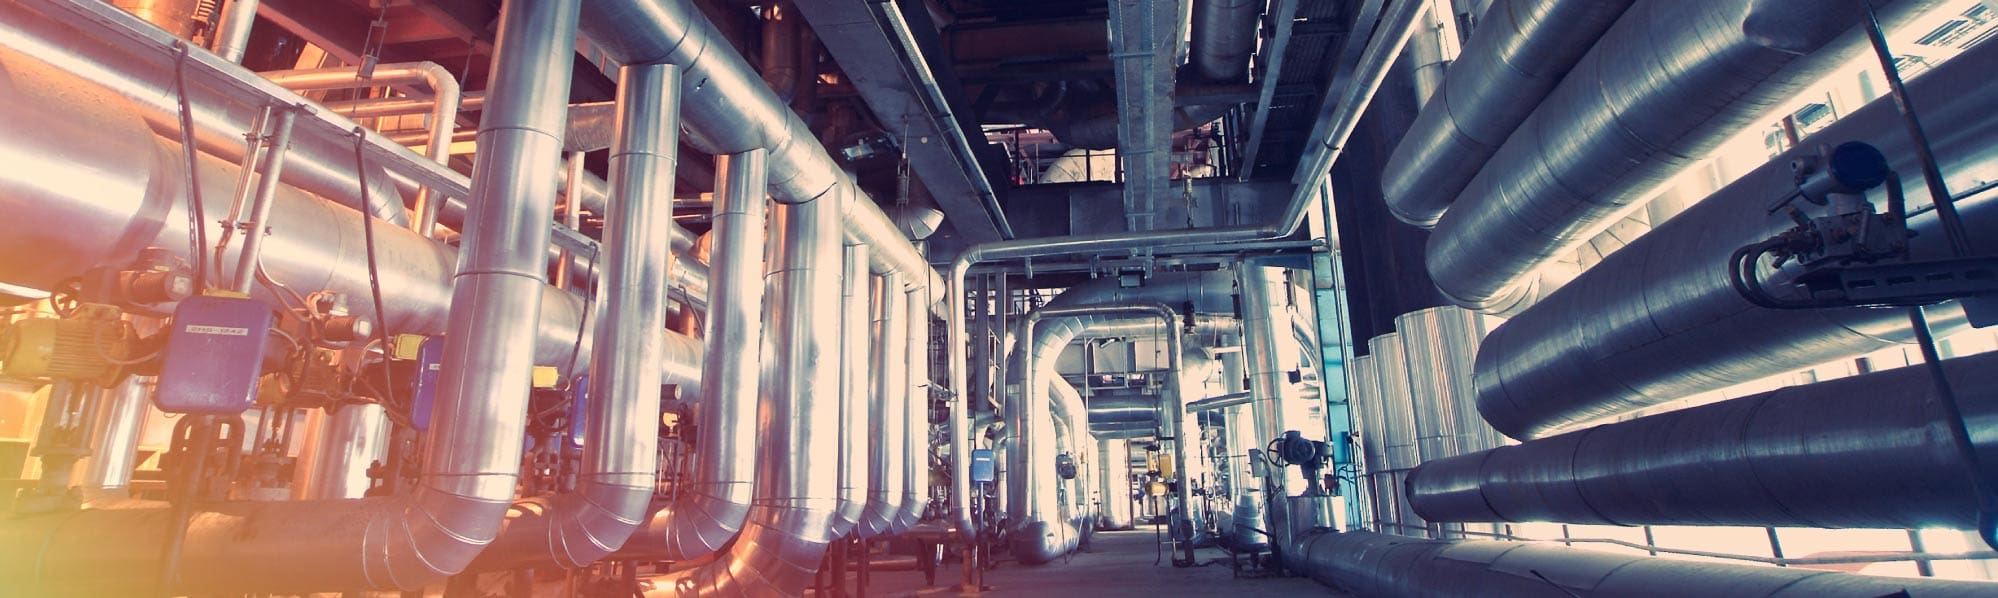 Image of large steel pipework in a factory